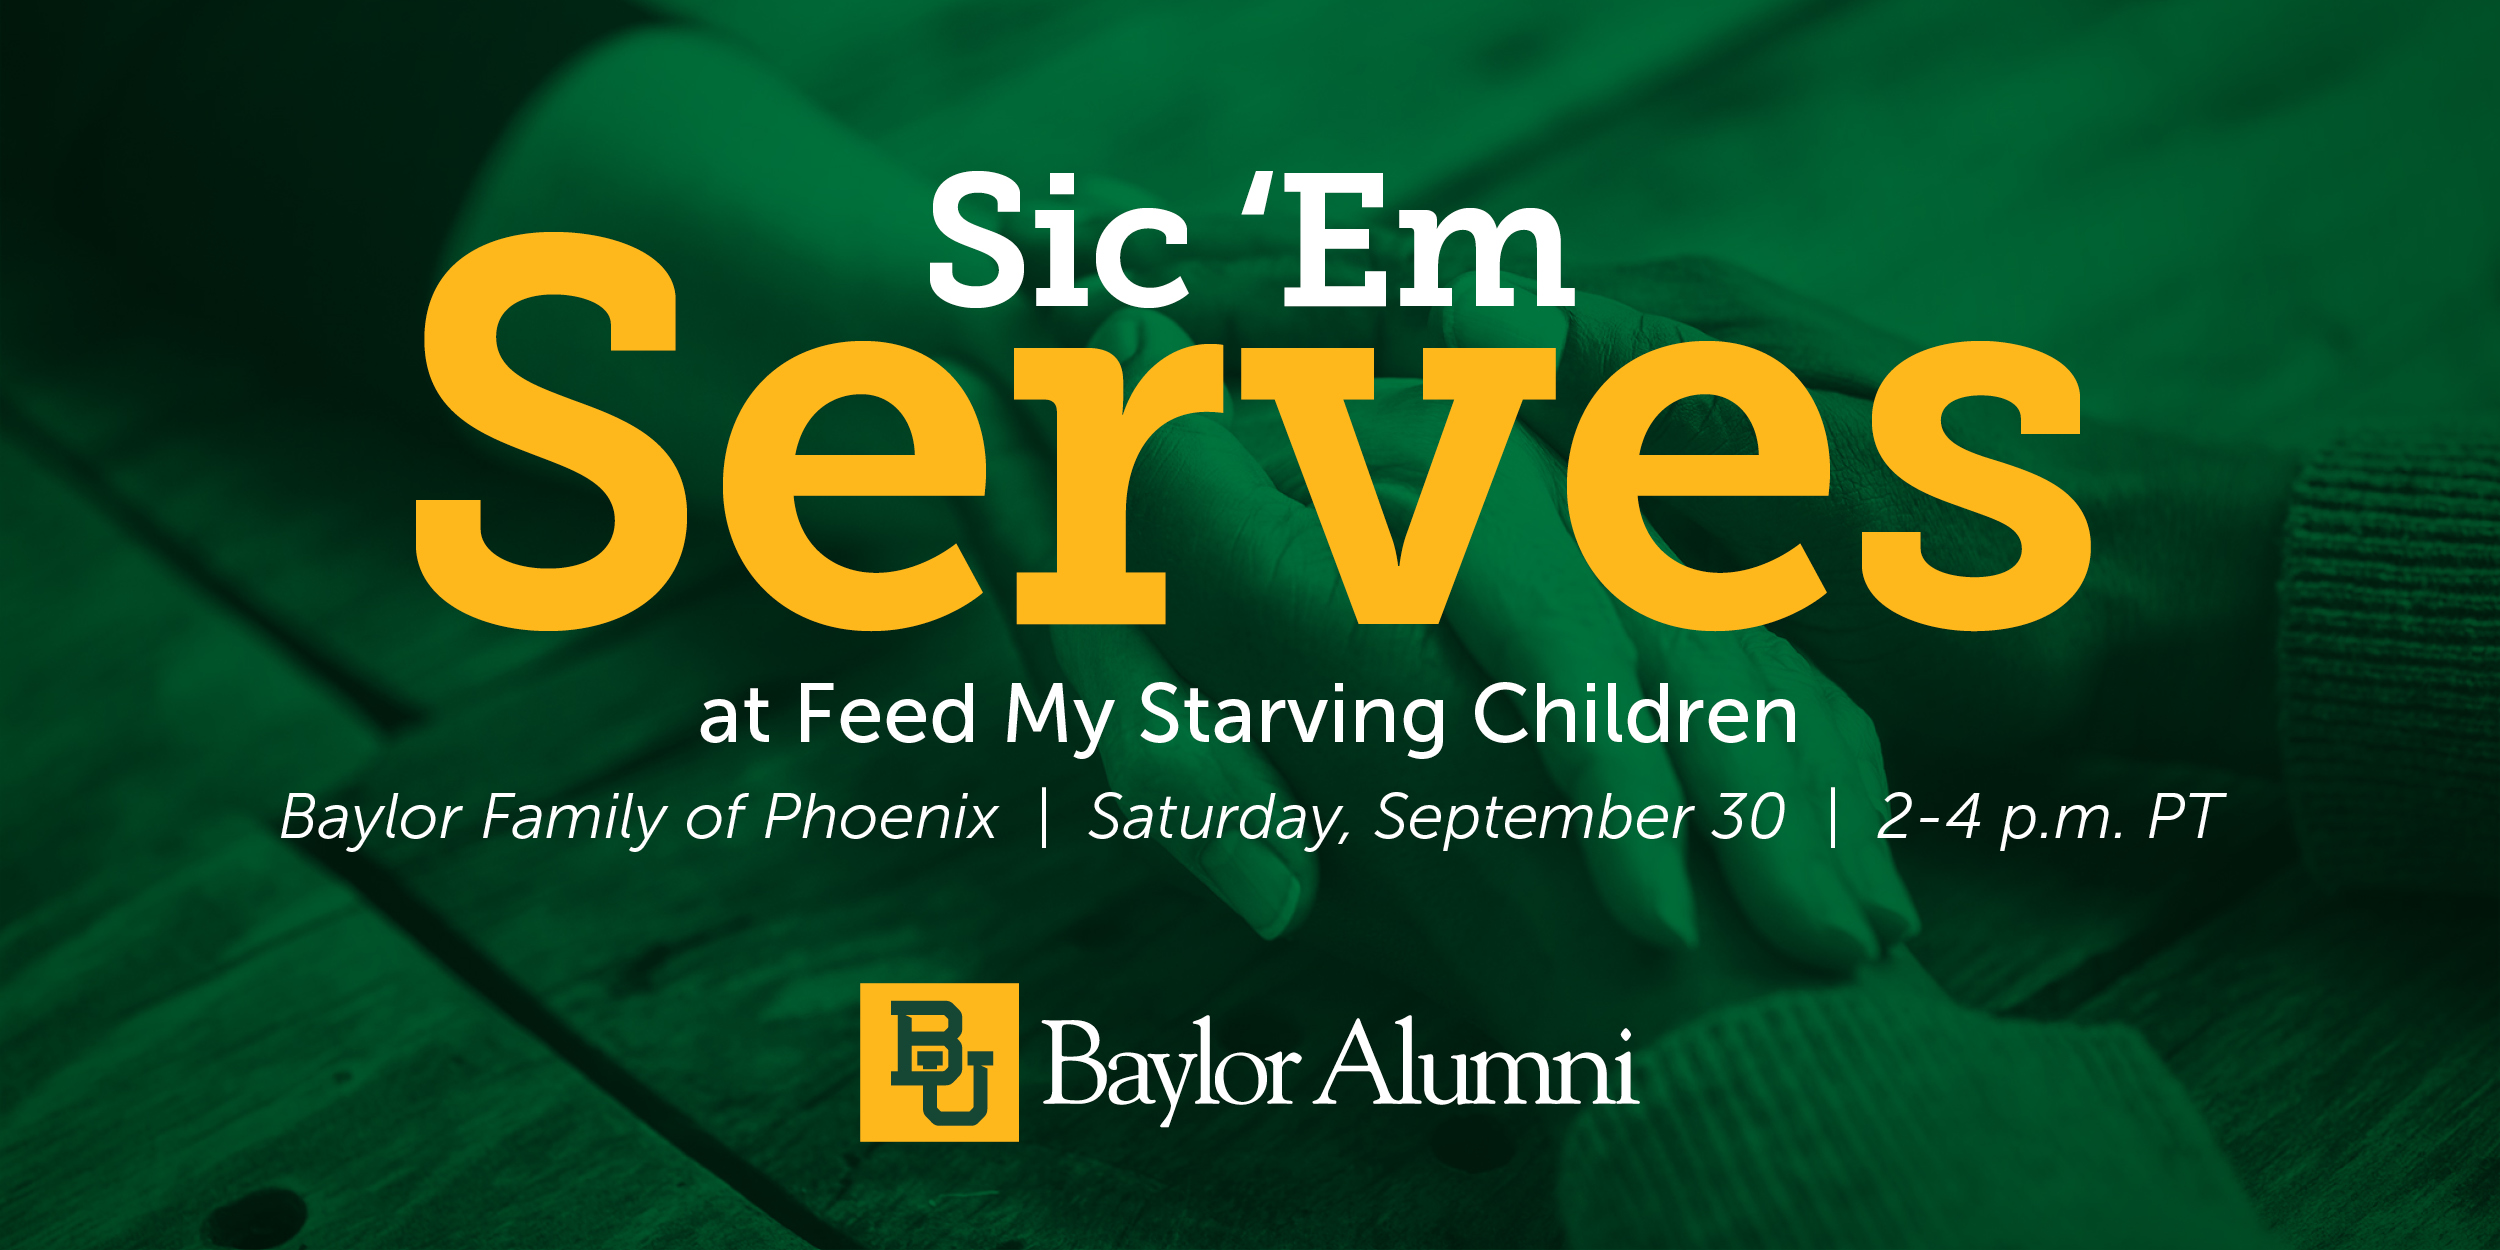 Sic 'Em Serves at Feed My Starving Children in Phoenix